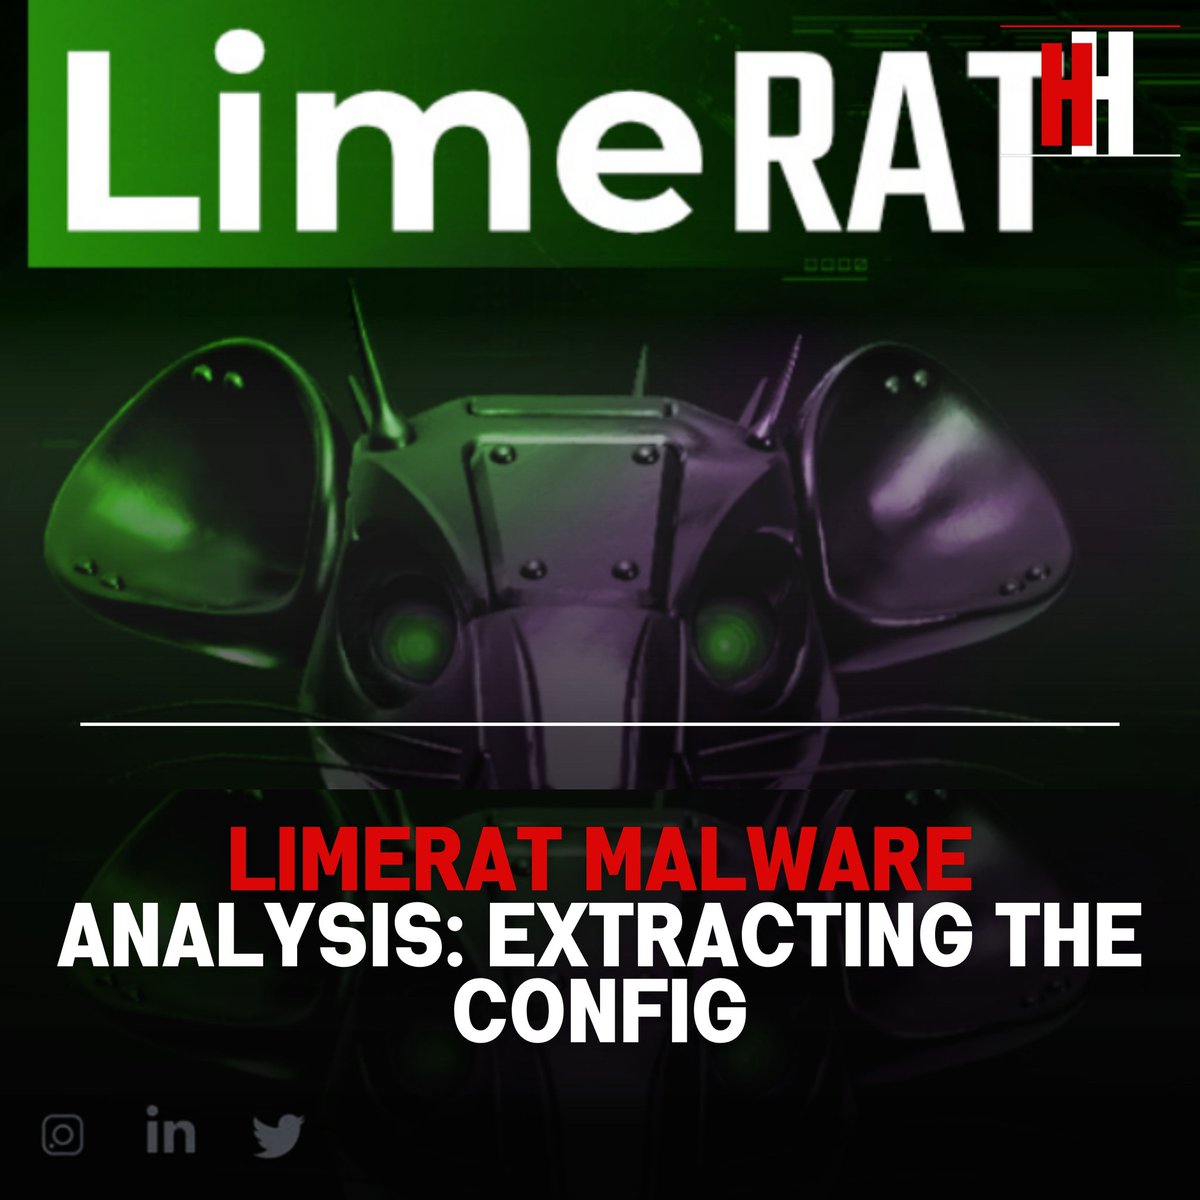 LimeRAT is a type of Remote Access Trojan (RAT) that has been active since 2019. It is multi-functional malware that perform a variety of malicious actions on an infected system, including stealing sensitive data and taking control of the system.
#LimeRAT #RemoteAccessTrojan #RAT